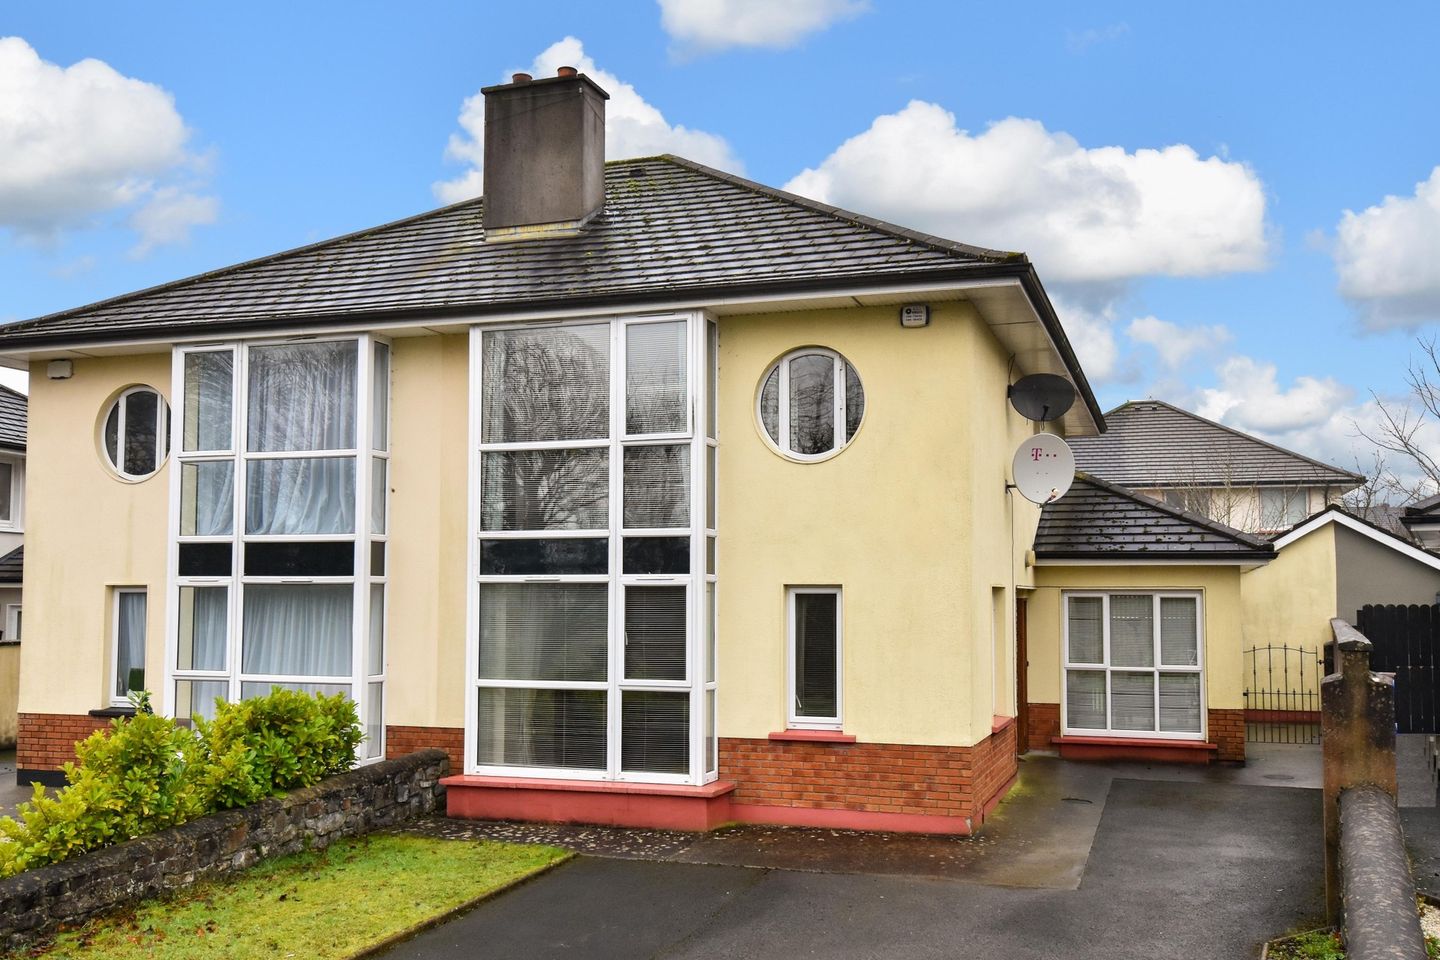 257 Palace Fields, Tuam, Co. Galway